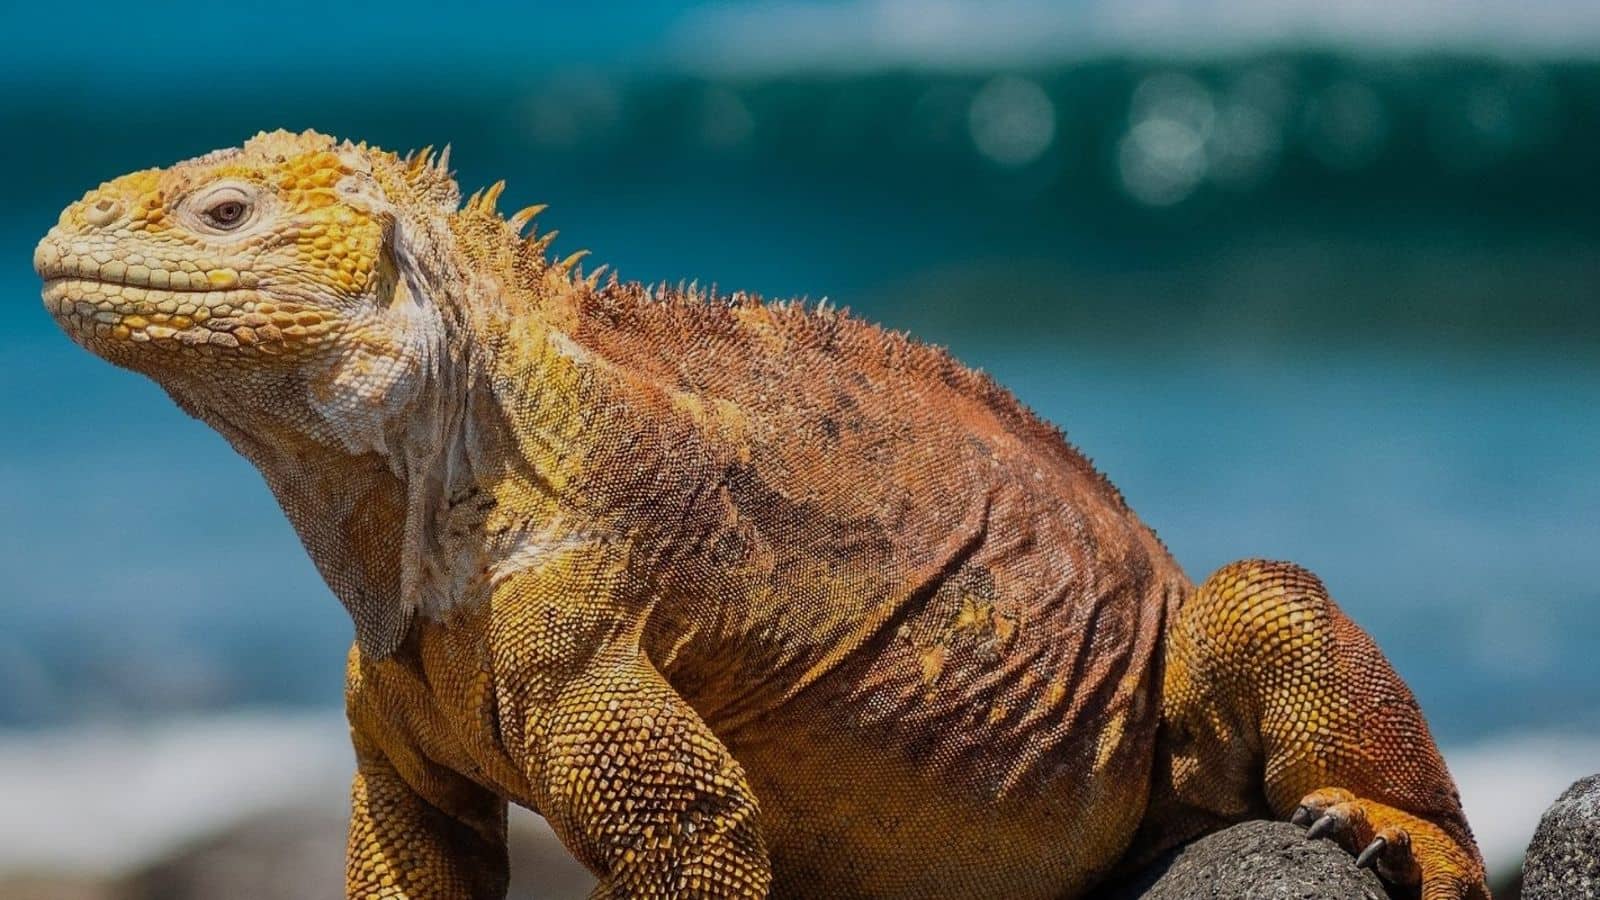 Explore exotic wildlife at the Galapagos Islands